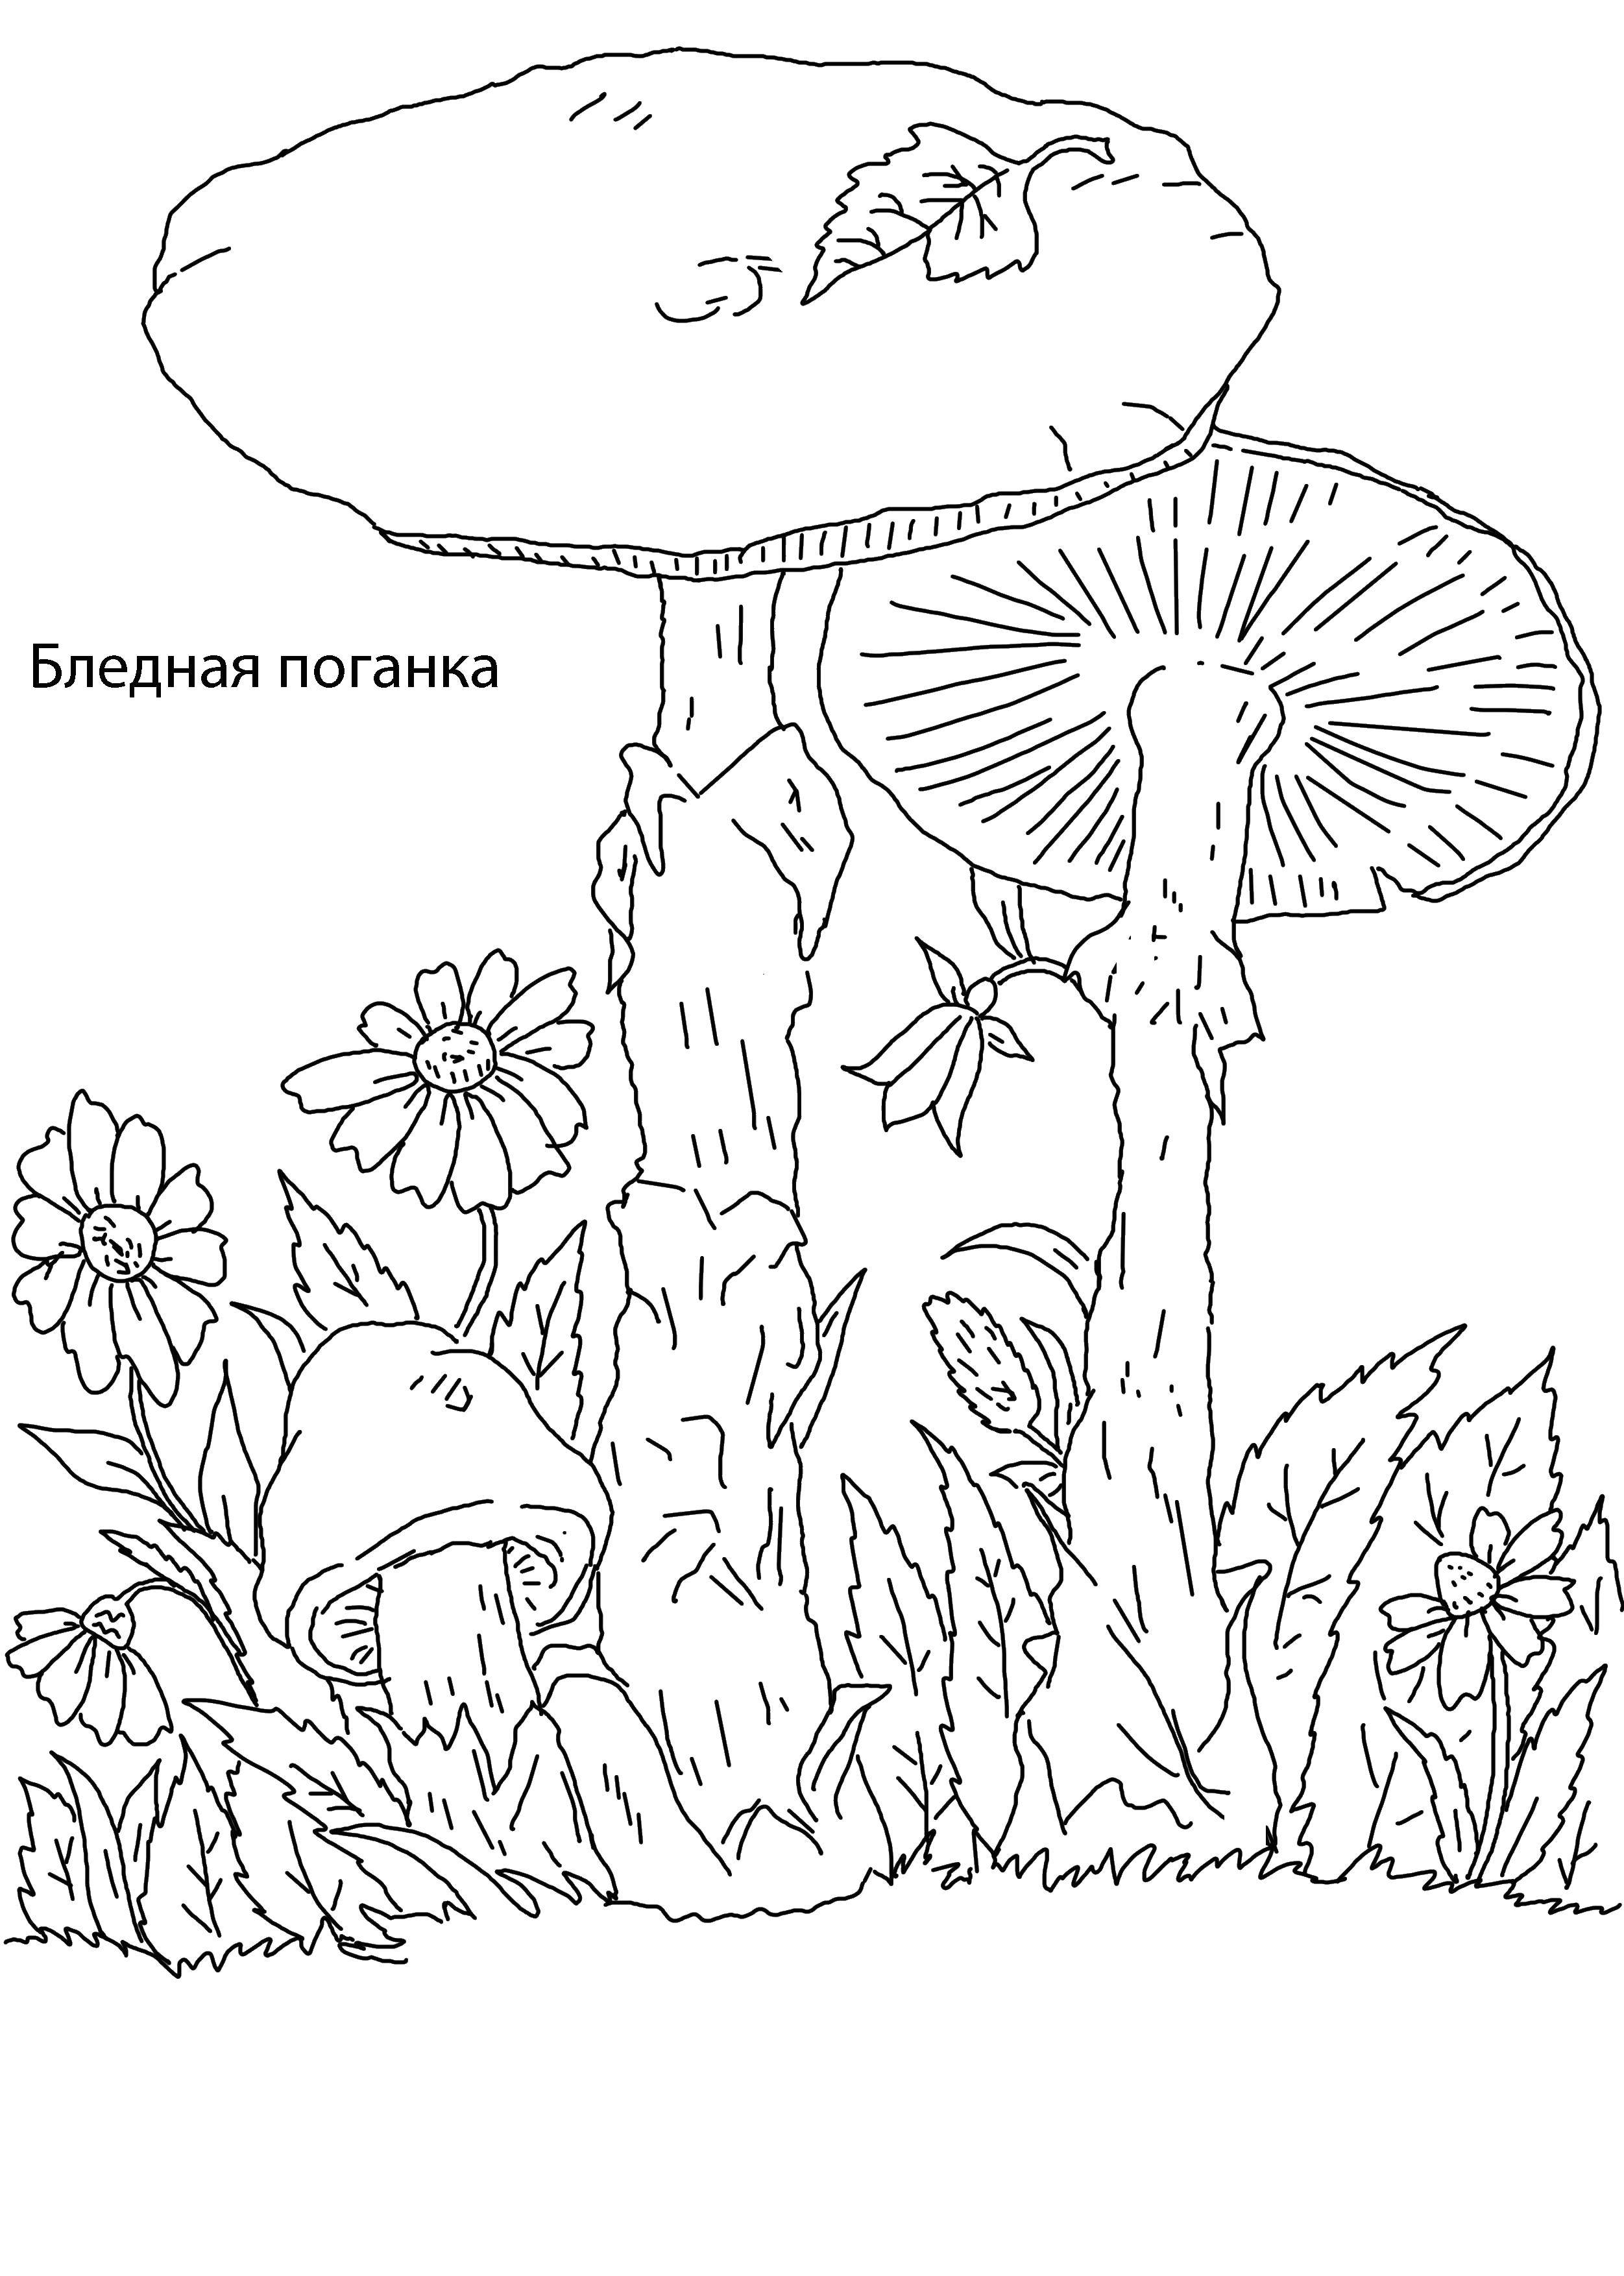 Coloring Pale toadstool. Category mushrooms. Tags:  mushrooms, pale toadstool.